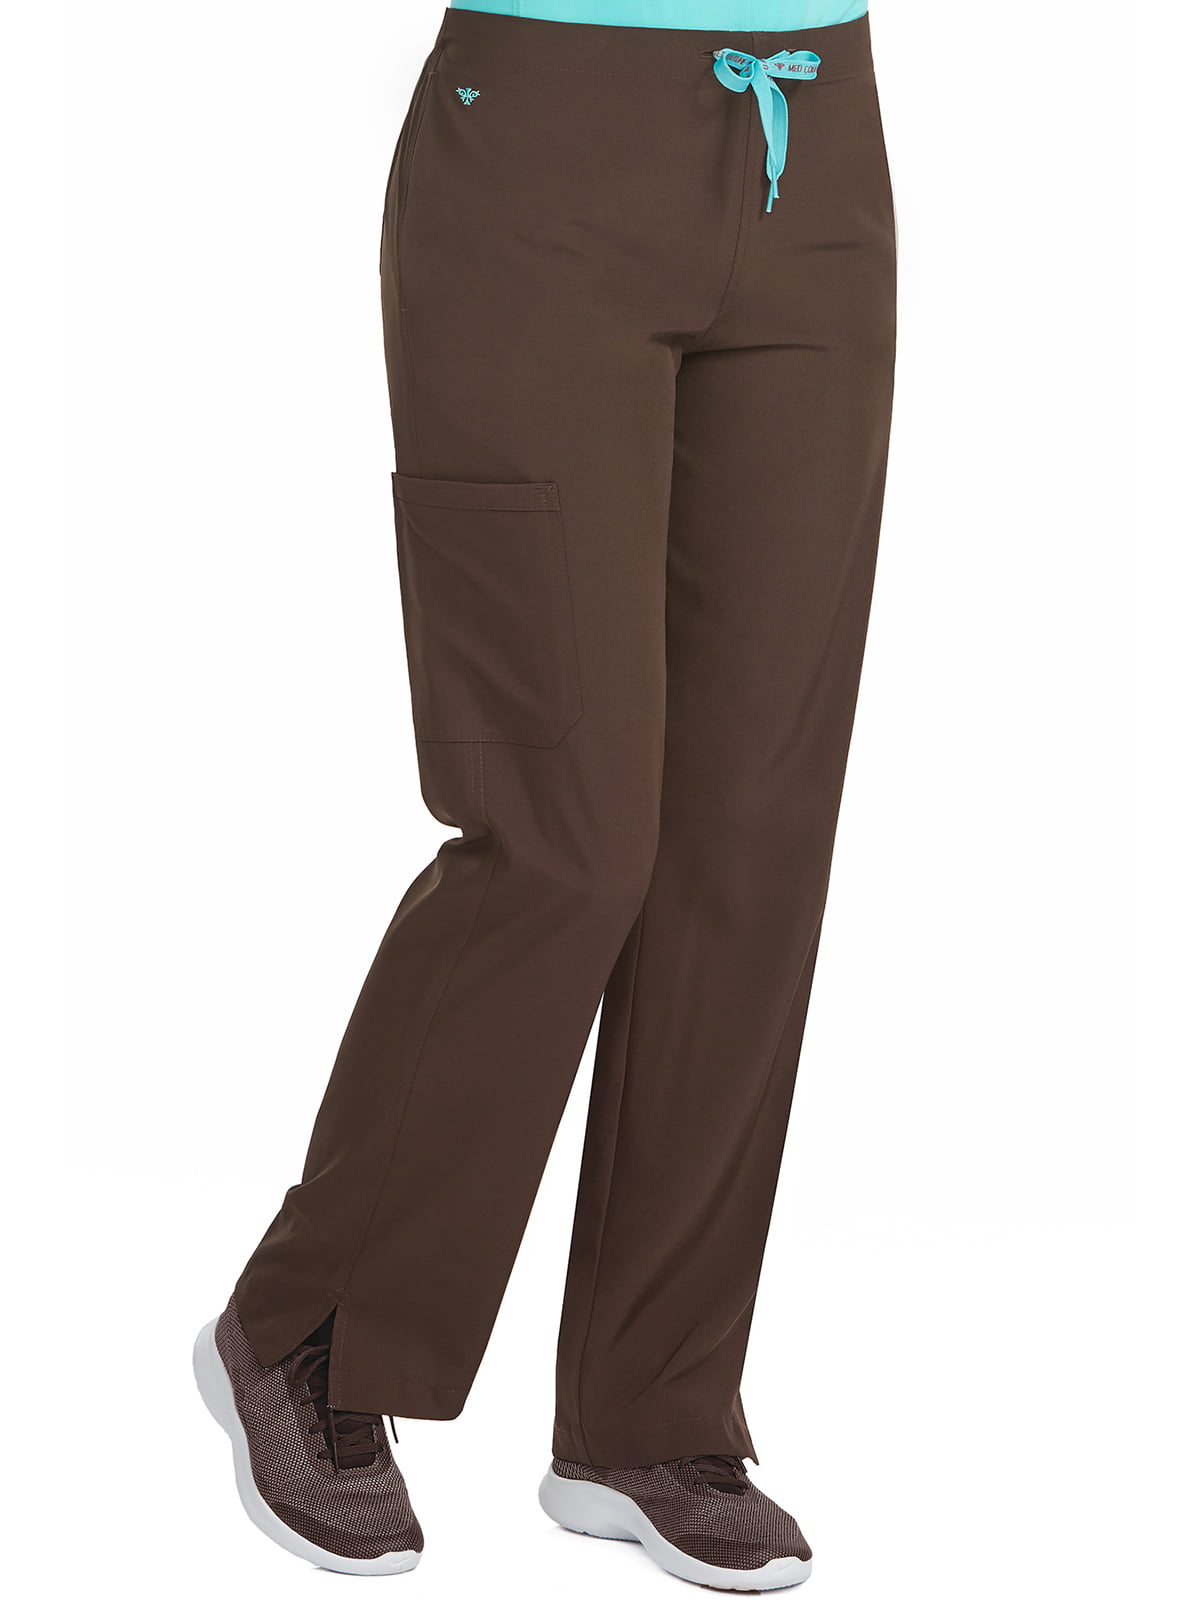 Med Couture Women's Energy One Cargo Pocket Pant 